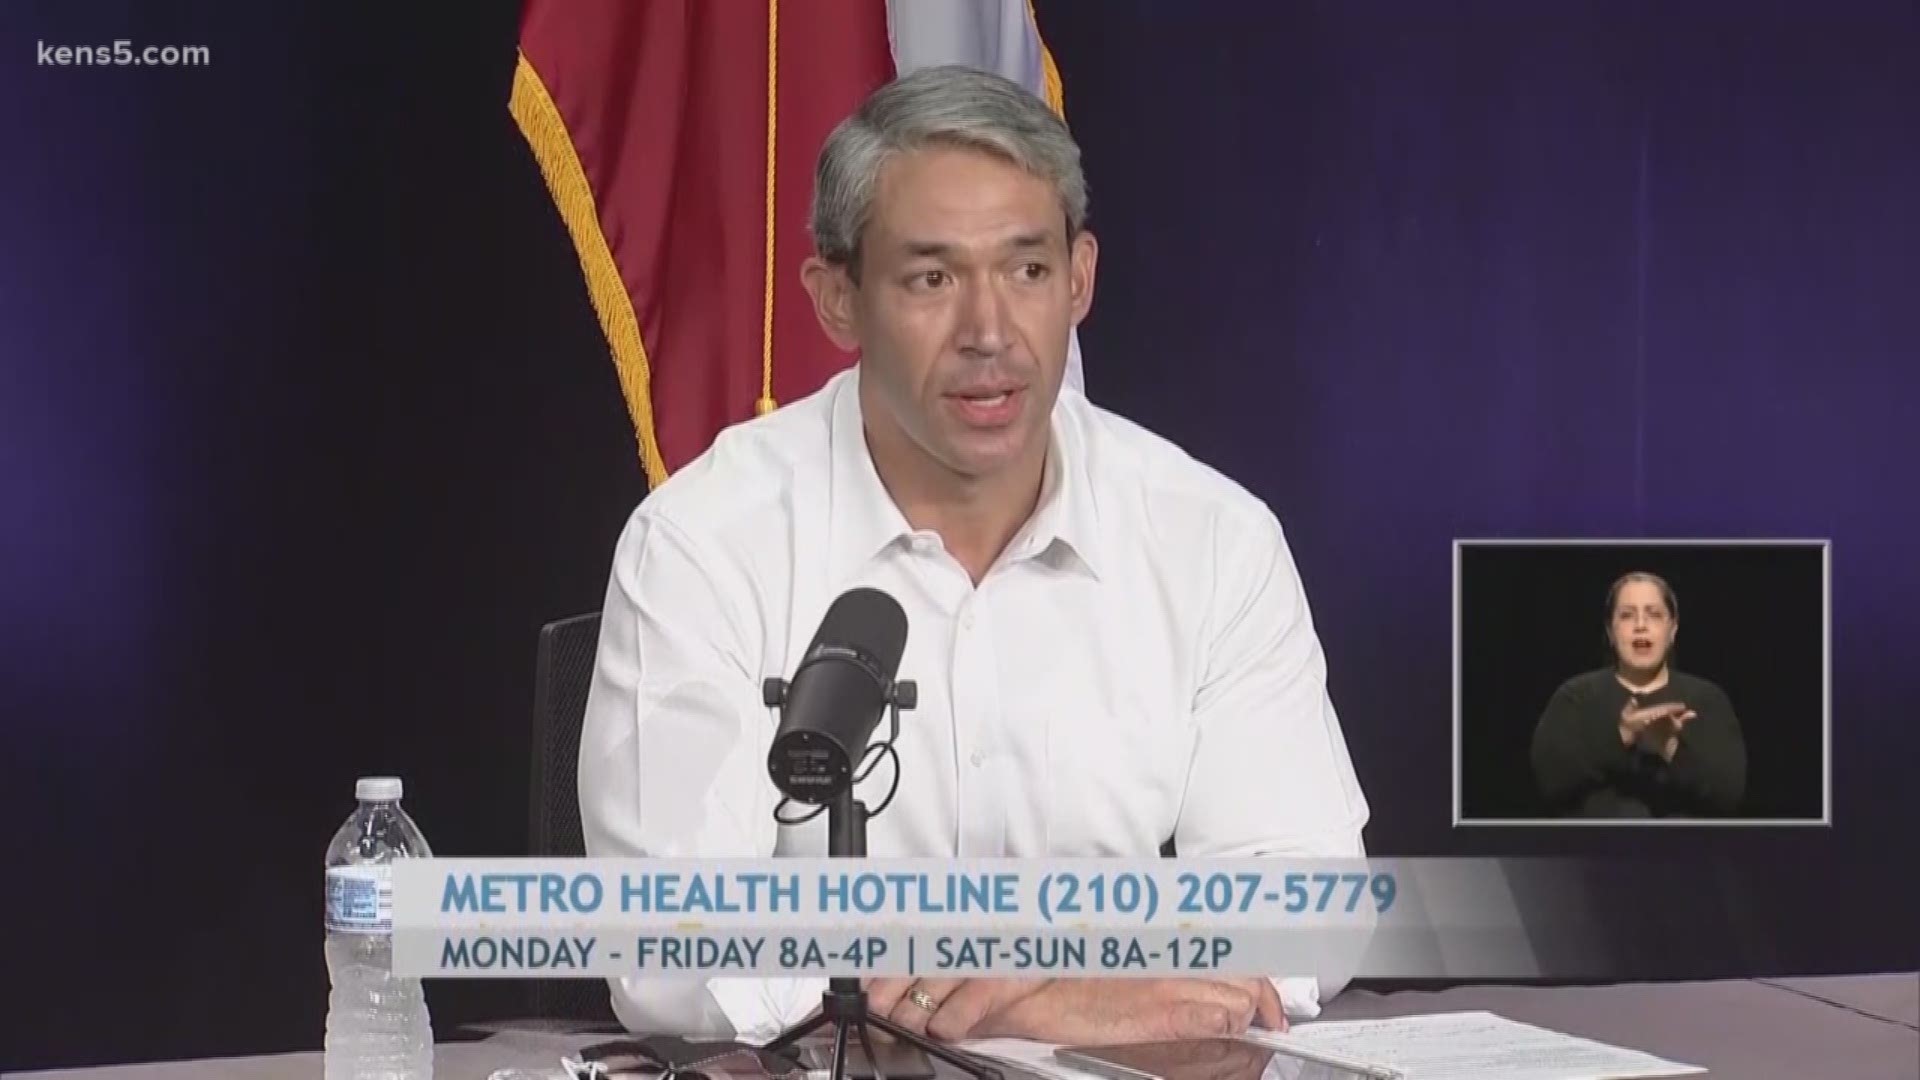 Mayor Nirenberg and Judge Wolff said that their order is in compliance with the Governor's, and said stricter measures in San Antonio have saved lives.